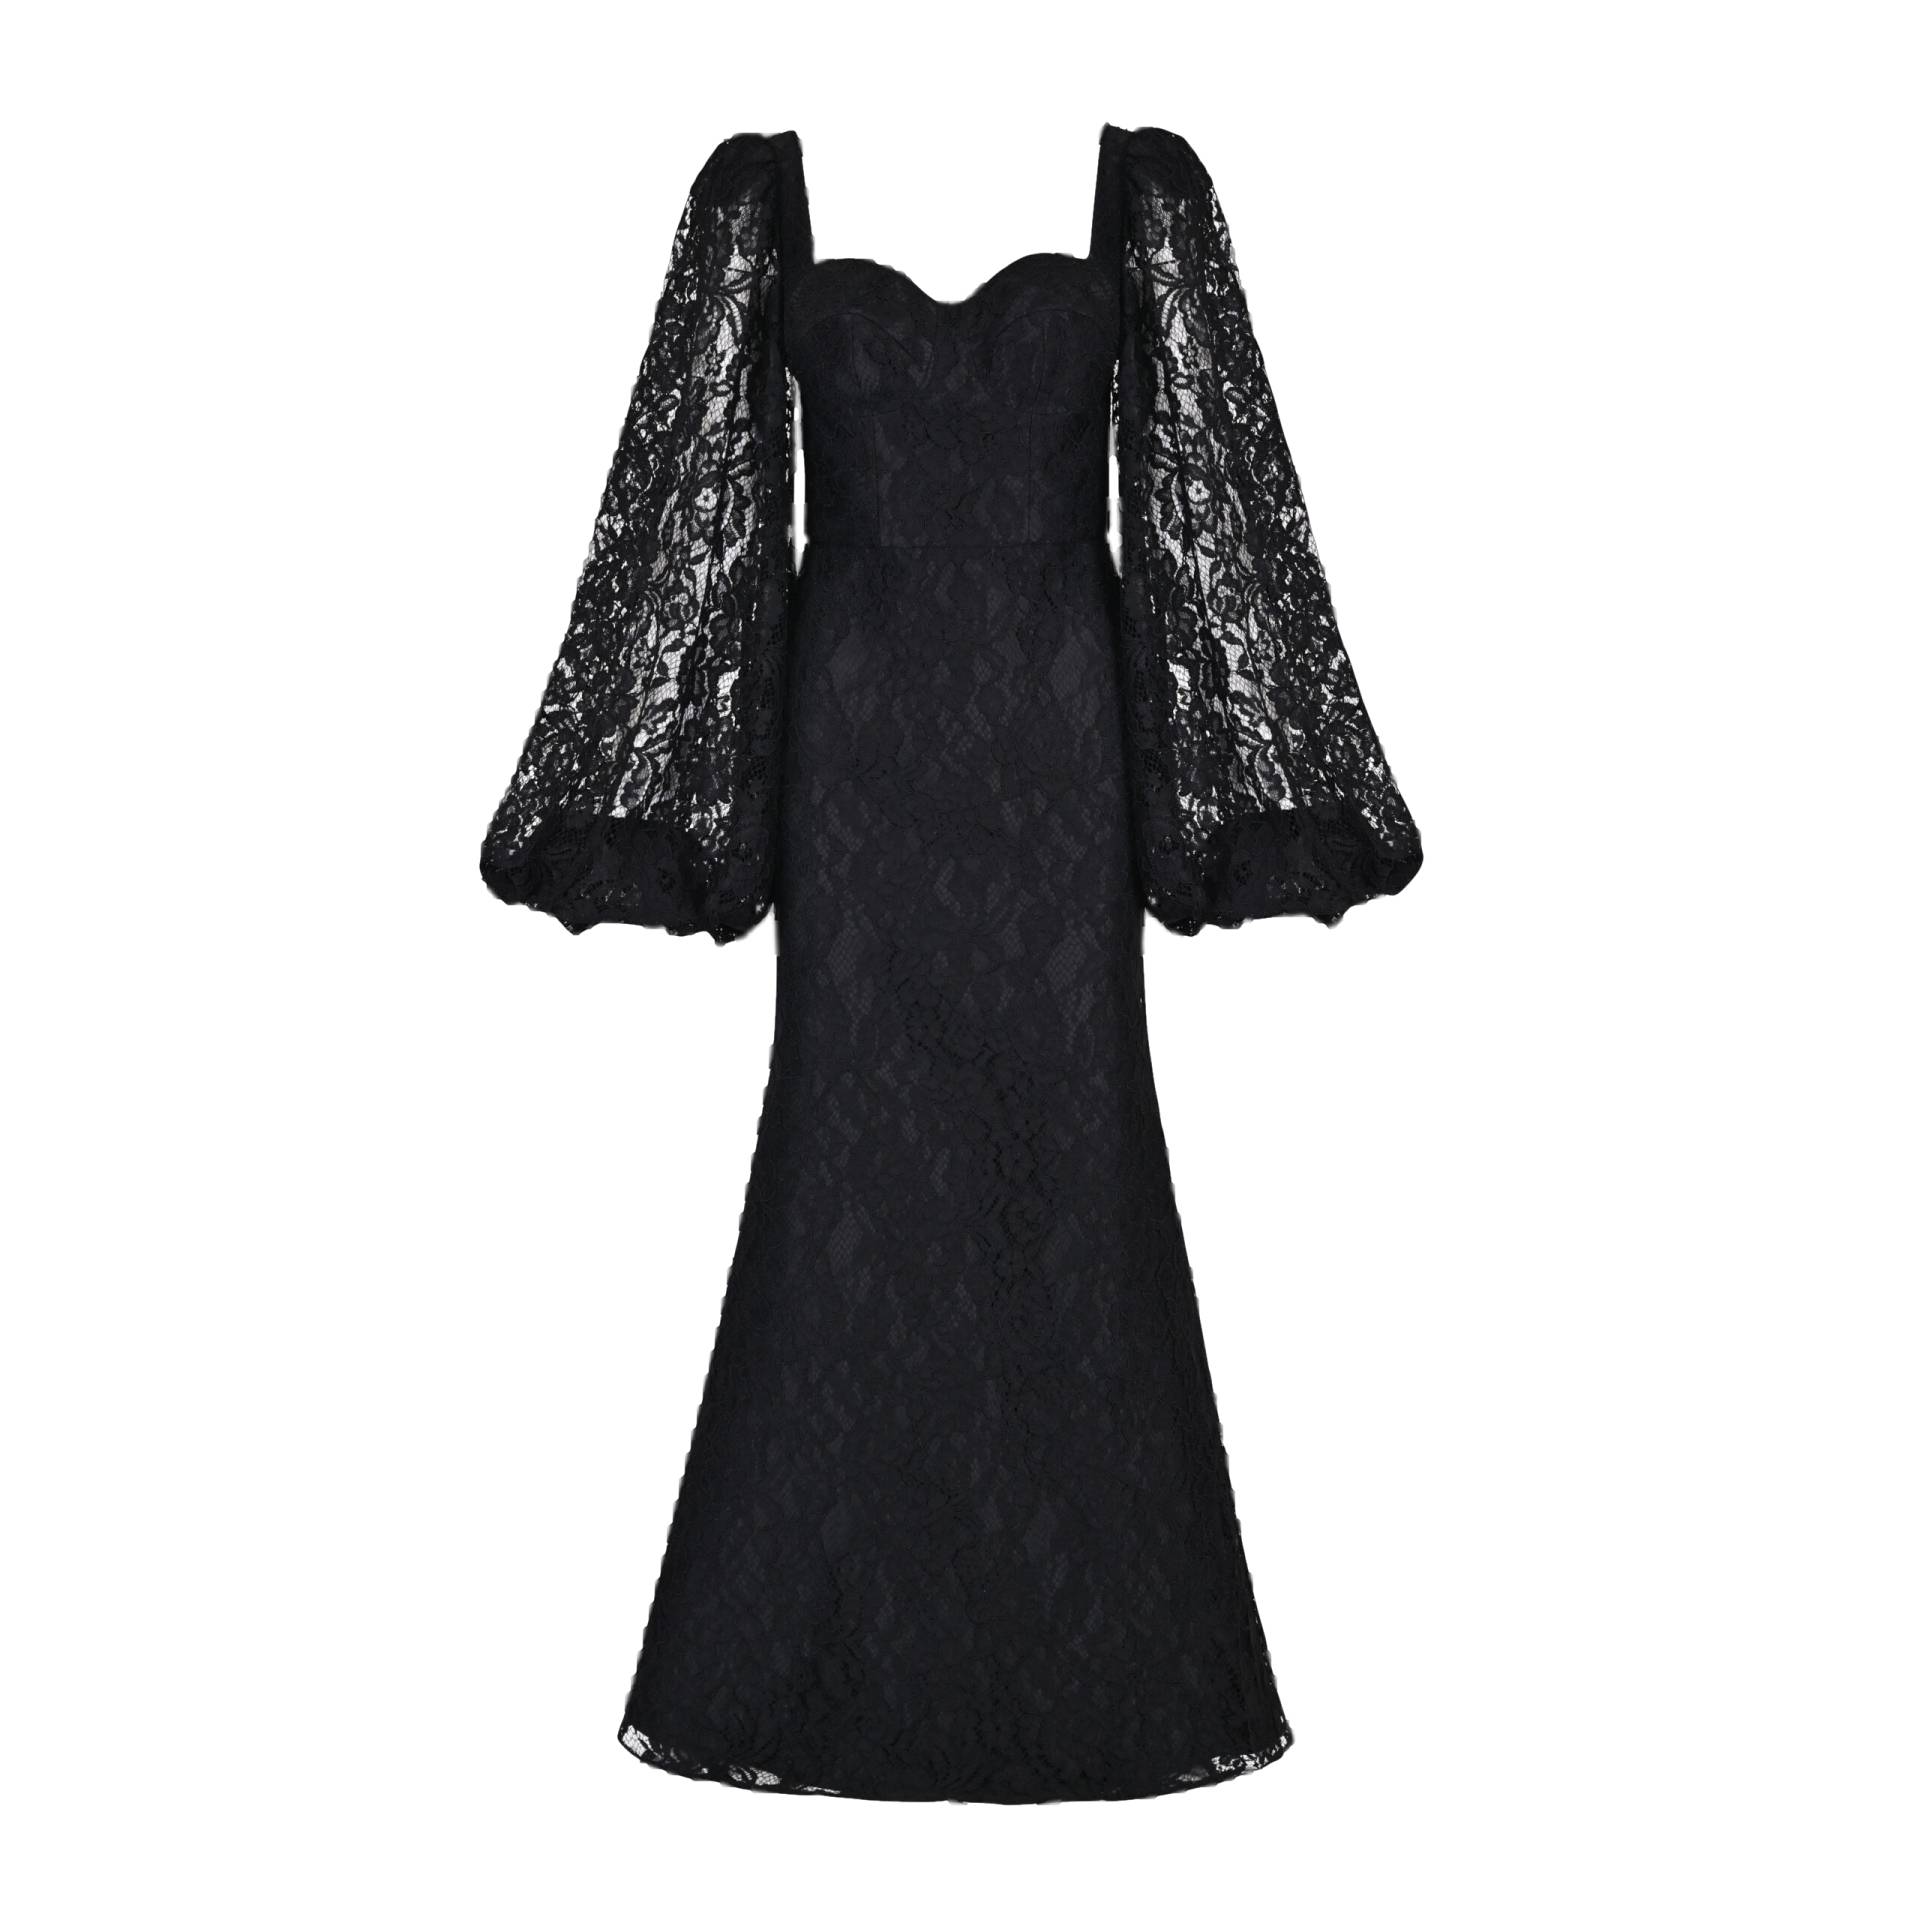 Black lace dress with wide sleeves von Lily Was Here